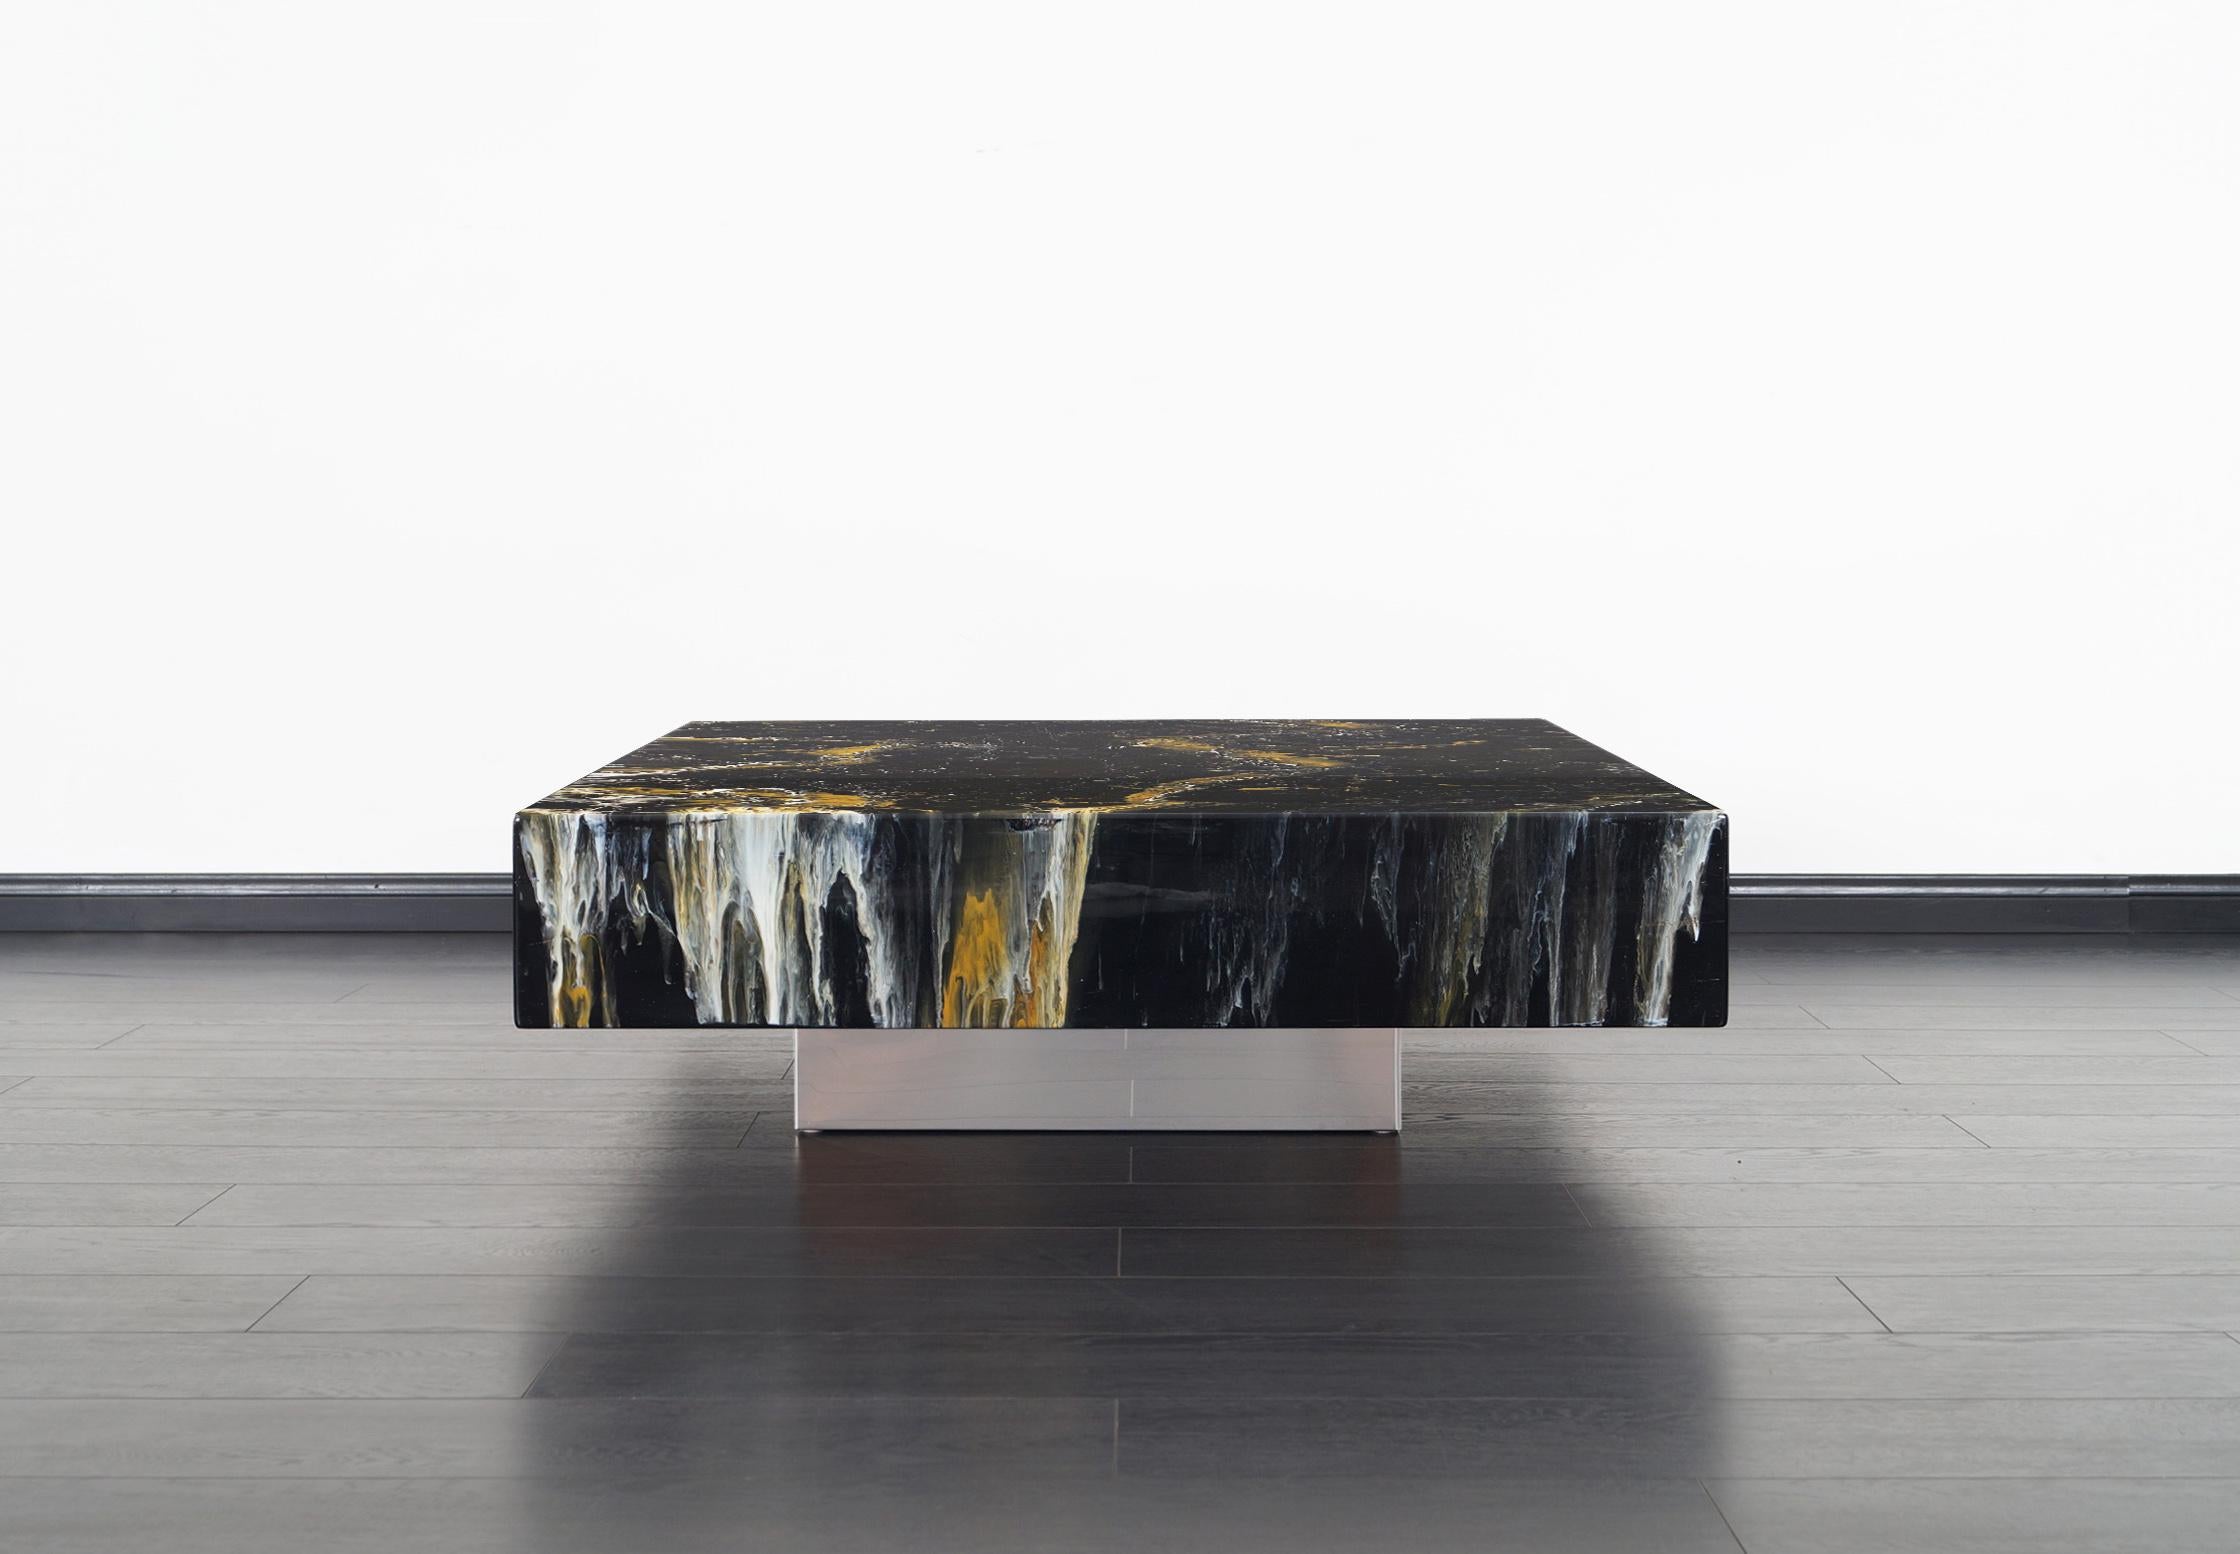 Phenomenal vintage cocktail table designed by Willy Rizzo in Italy, circa 1970s. This stunning design features a faux marble top that sits over a stainless steel base, making it seem like the top is floating mid-air. Willy Rizzo's cocktail tables